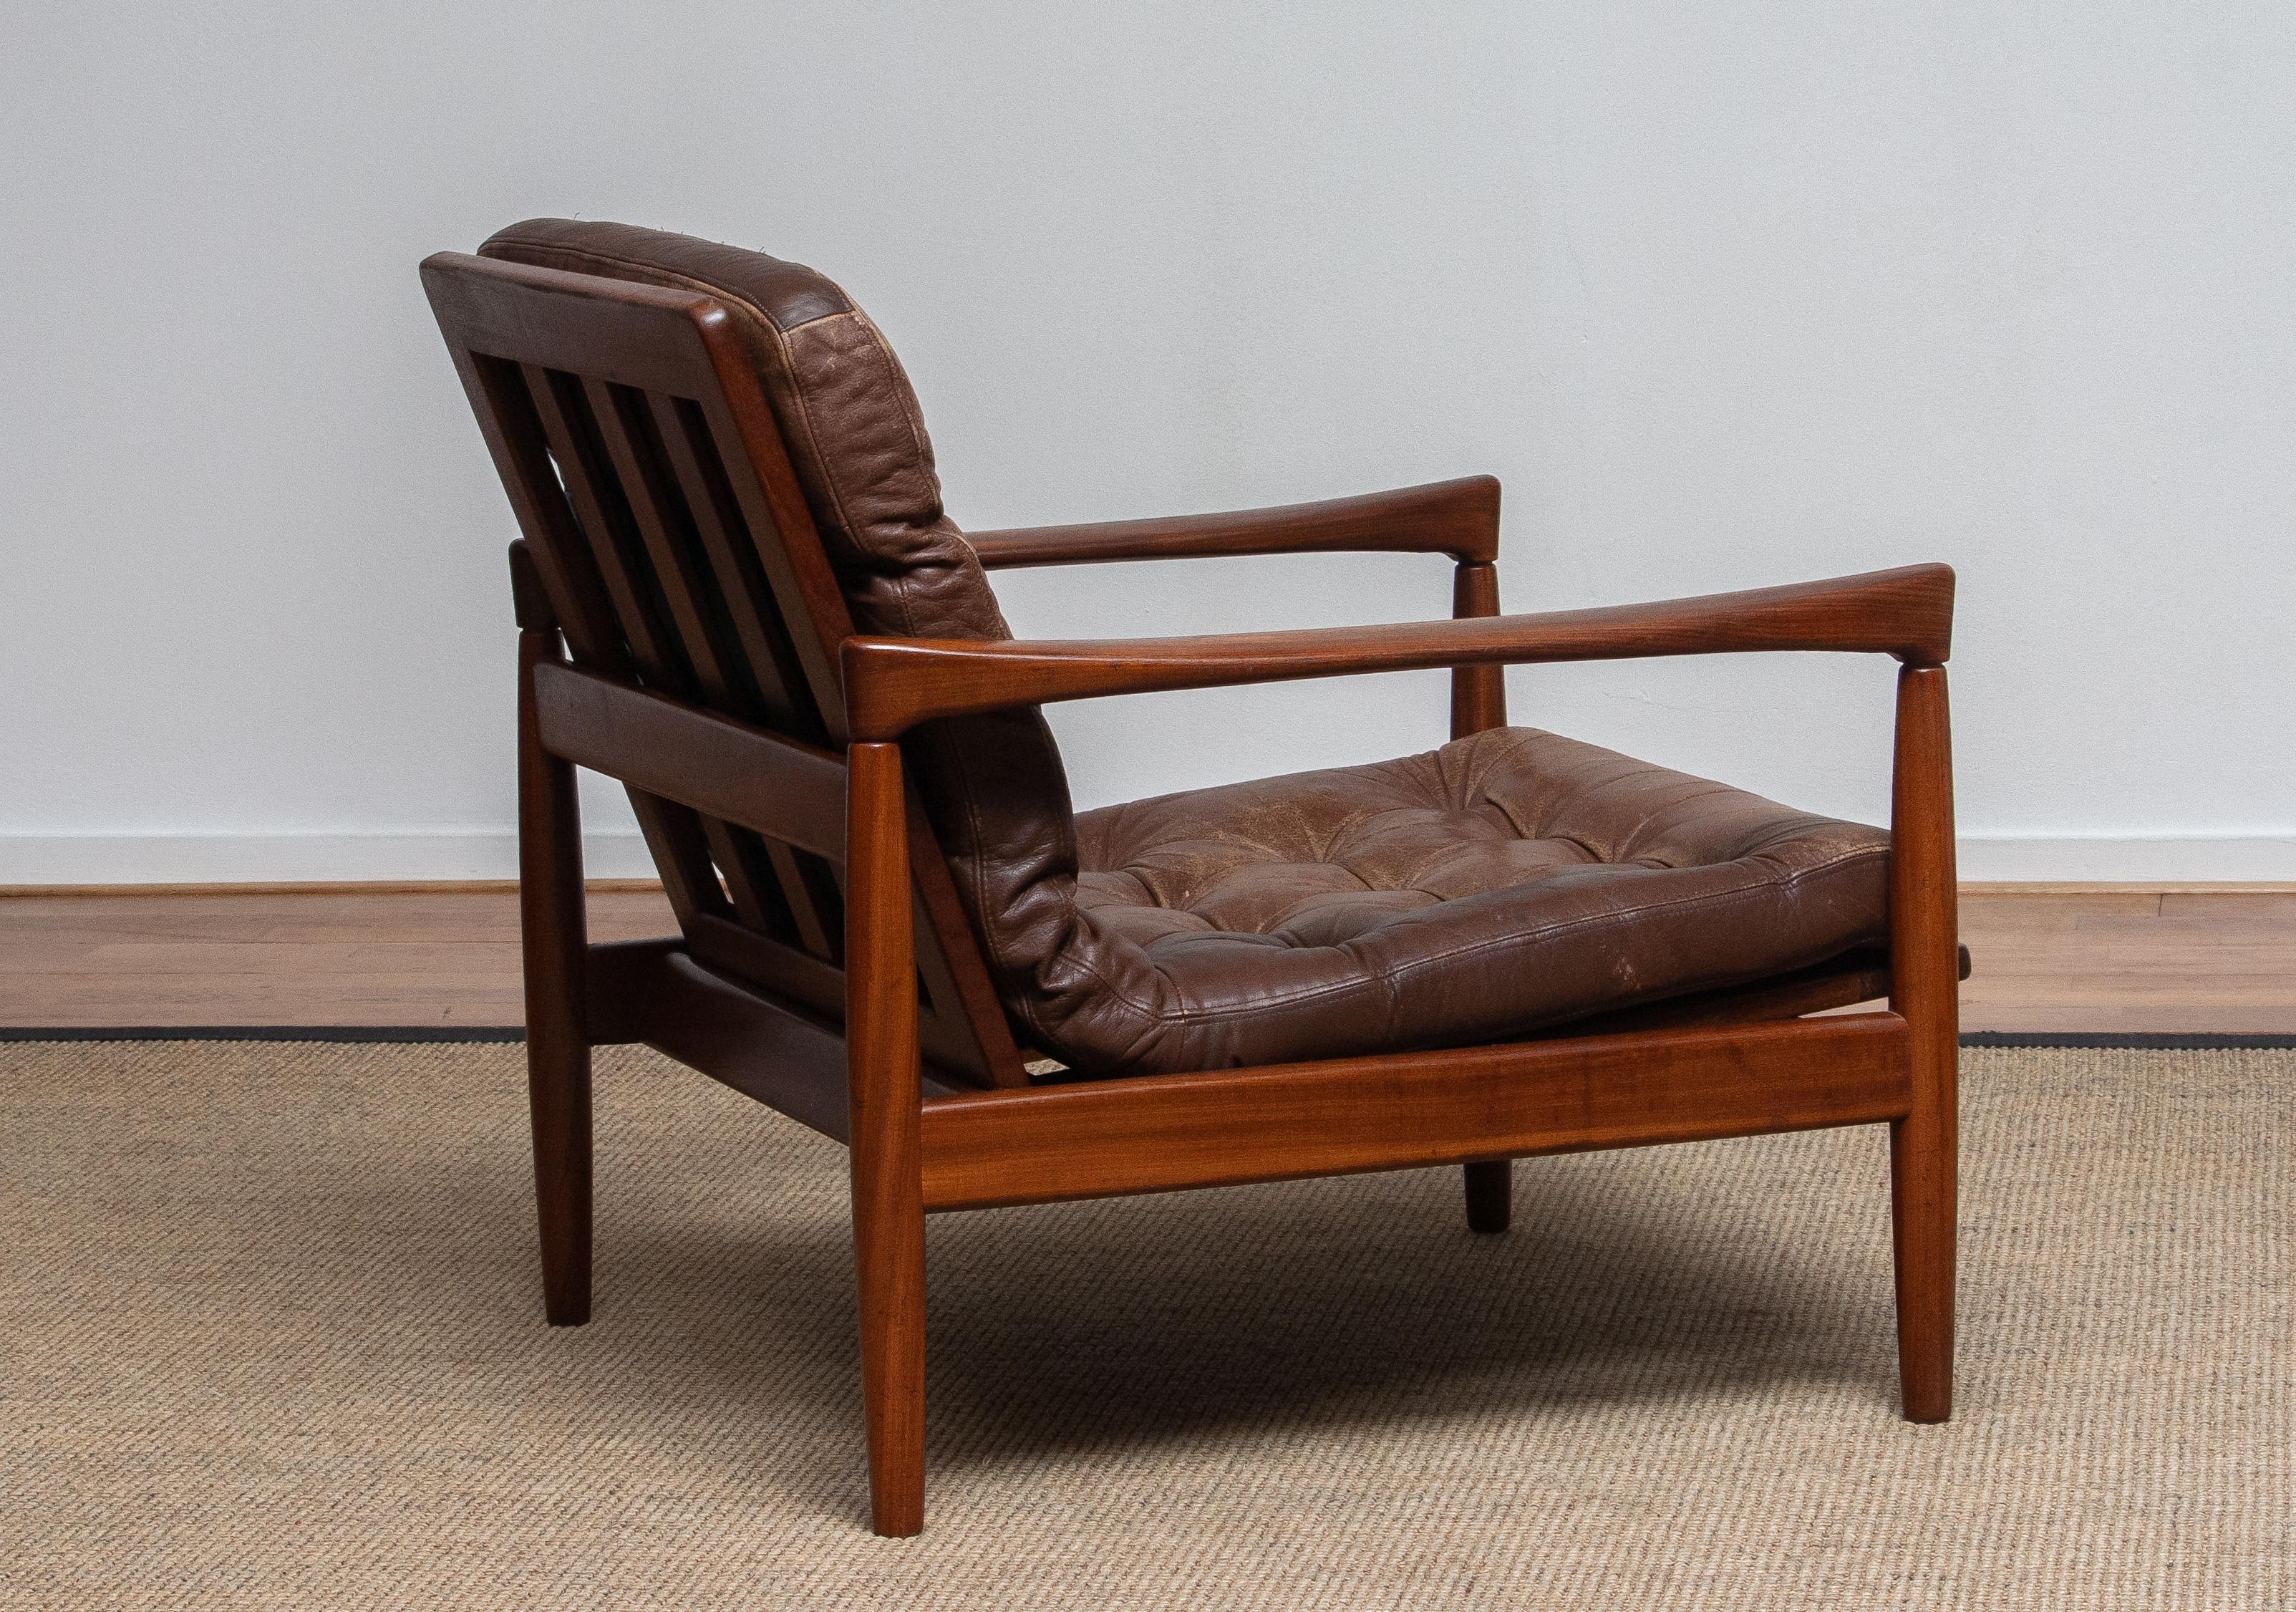 1960s, Teak and Brown Leather Lounge Chair by Erik Wörtz for Bröderna Anderssons 4